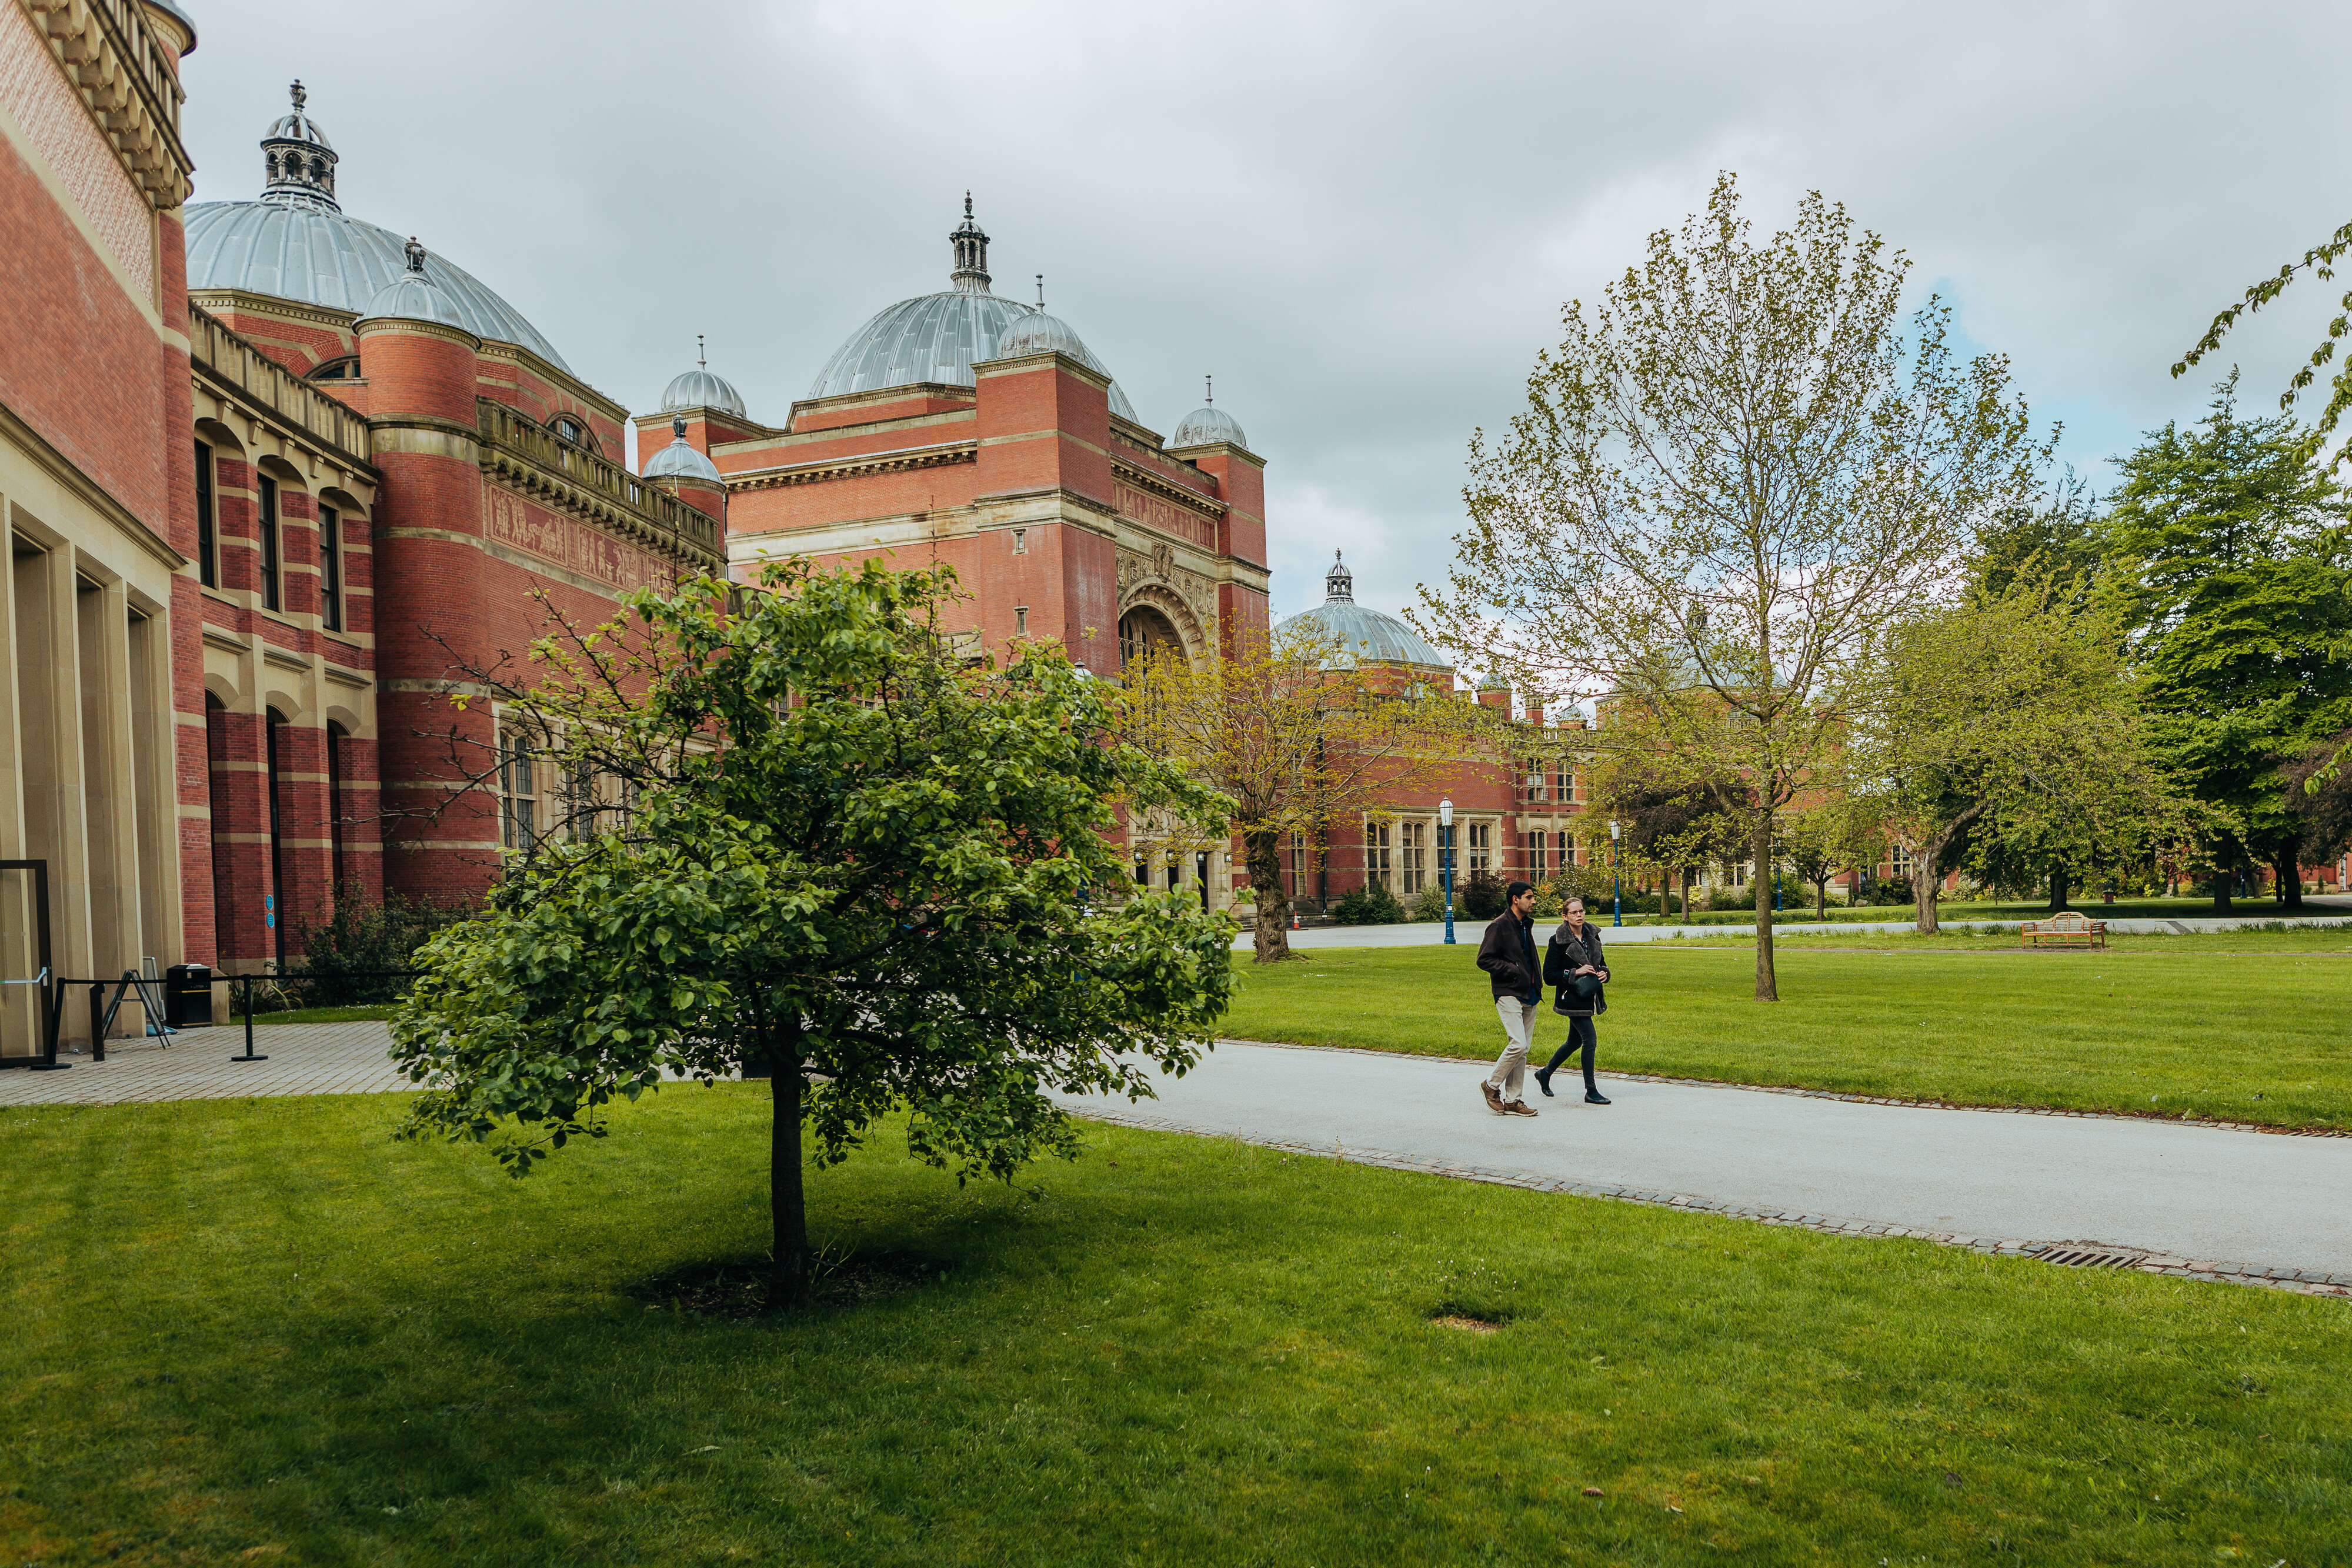 Two people walking on a pathway outside of the Aston Webb building